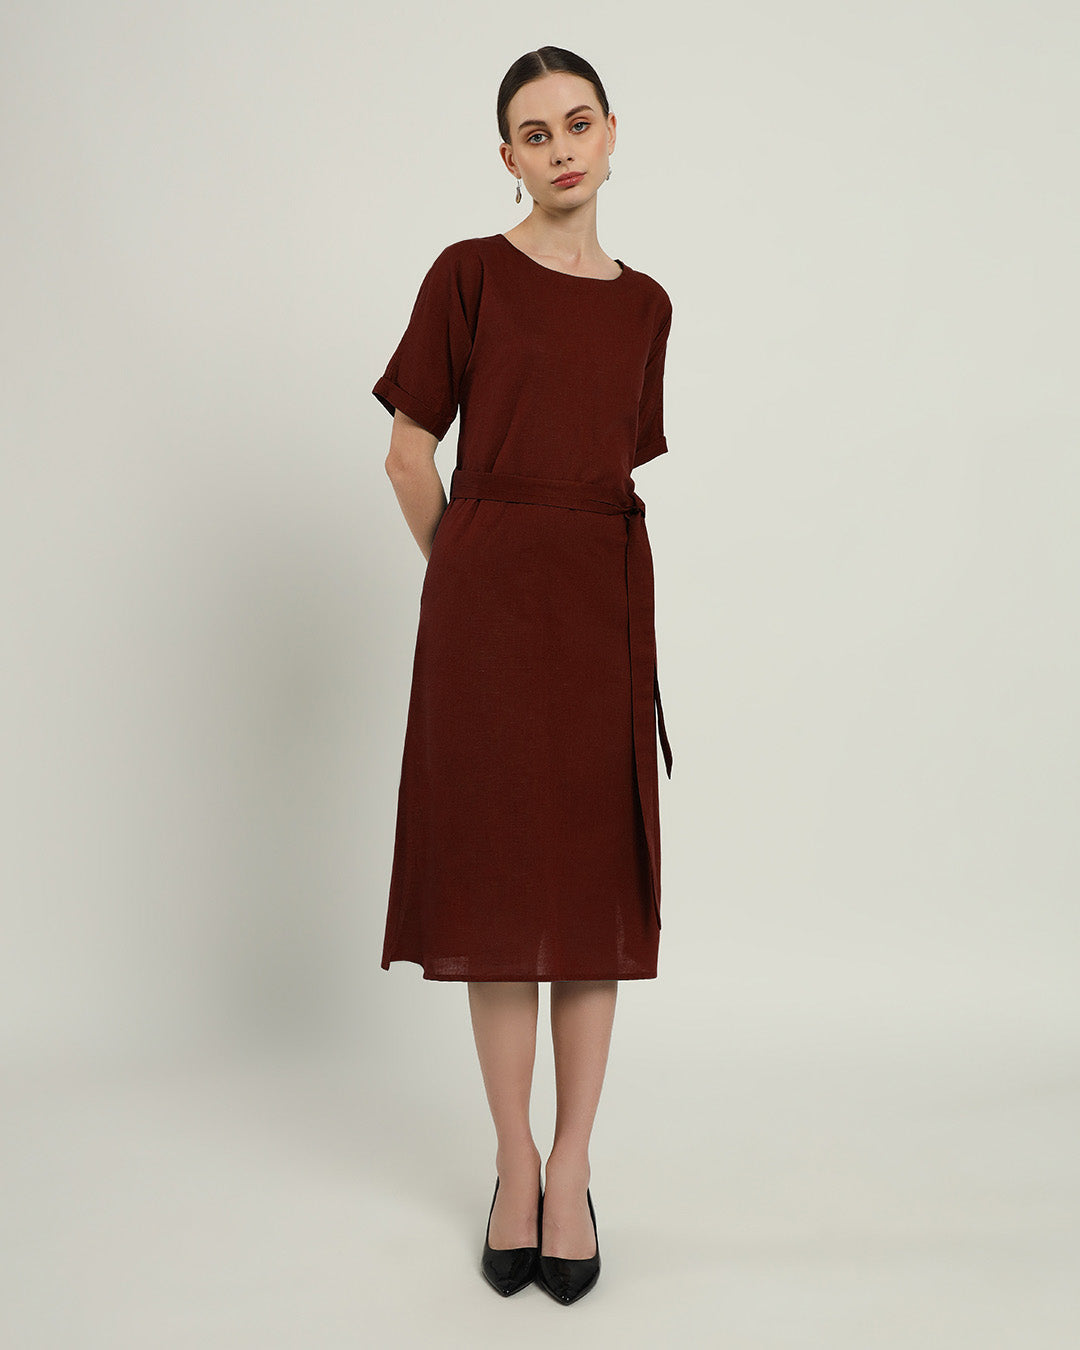 The Tayma Rouge Cotton Dress